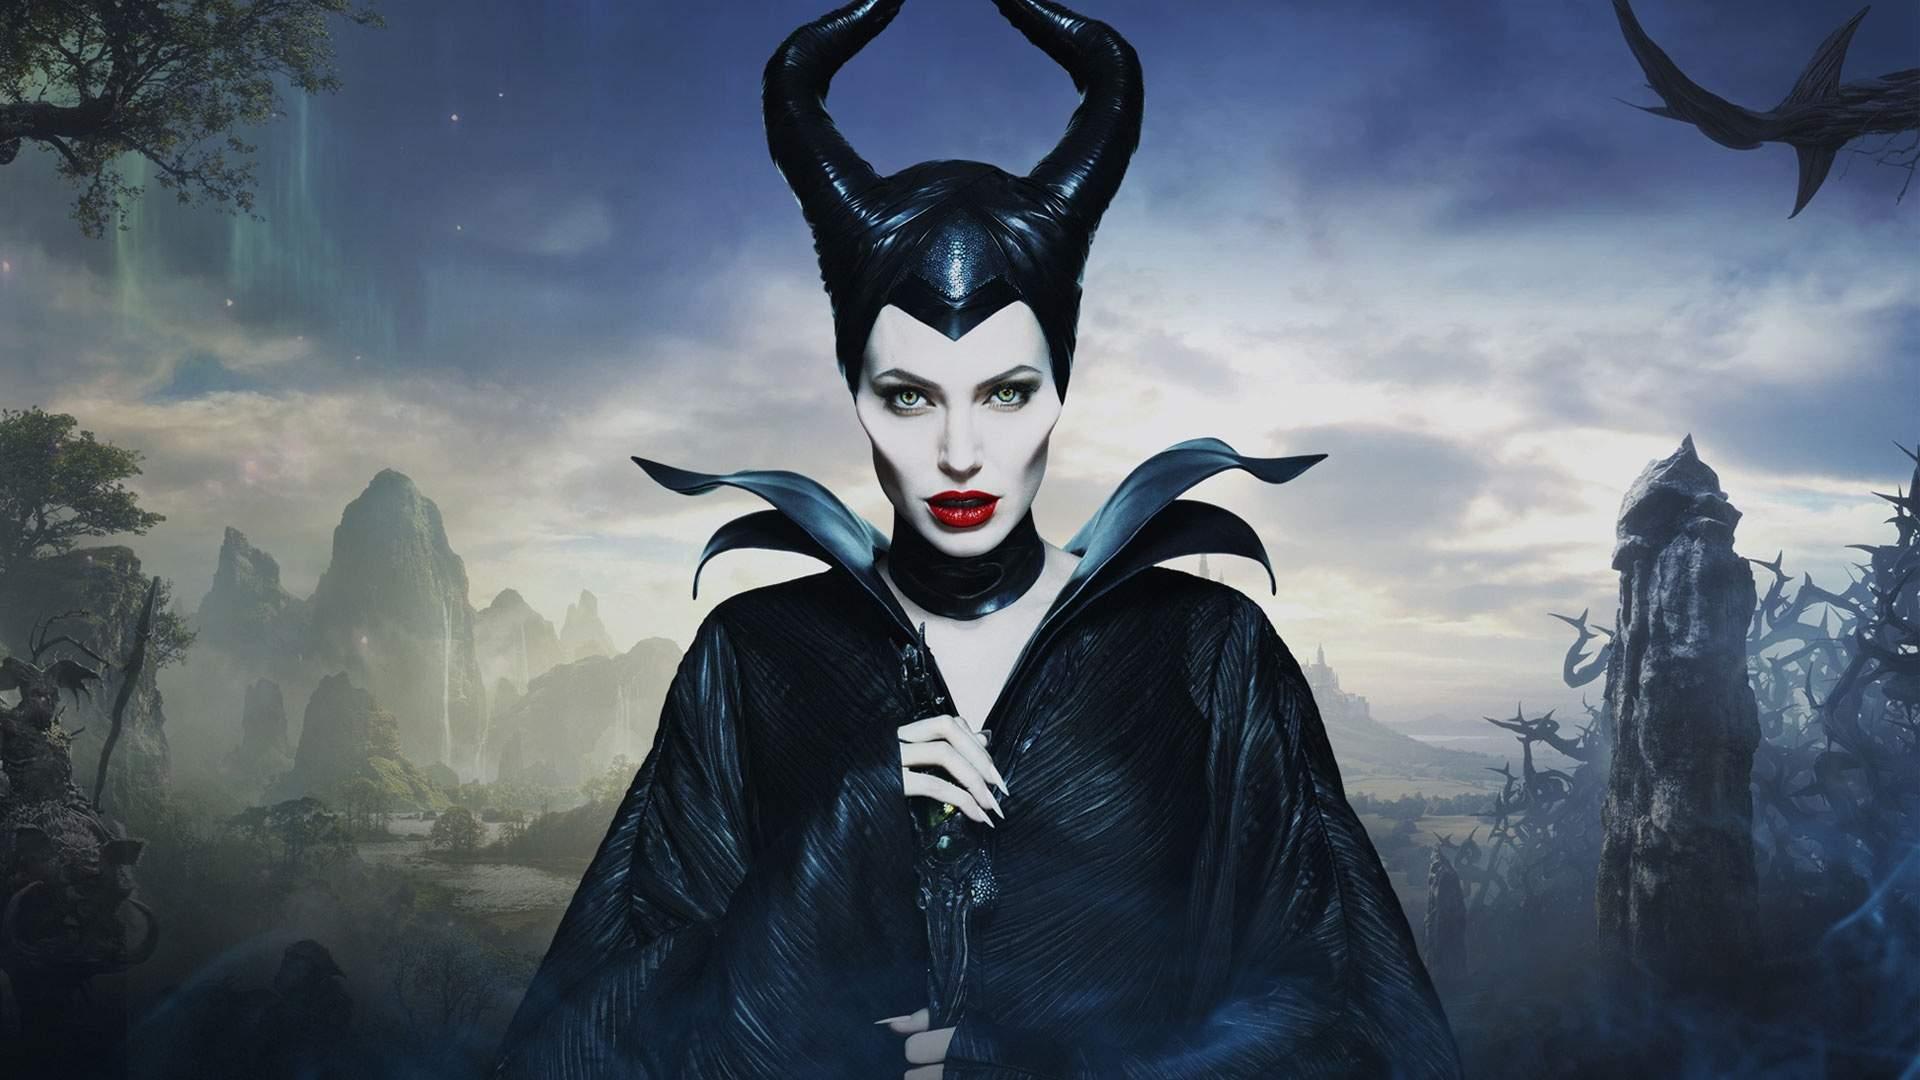 All about the teaser of Maleficent: Mistress of Evil